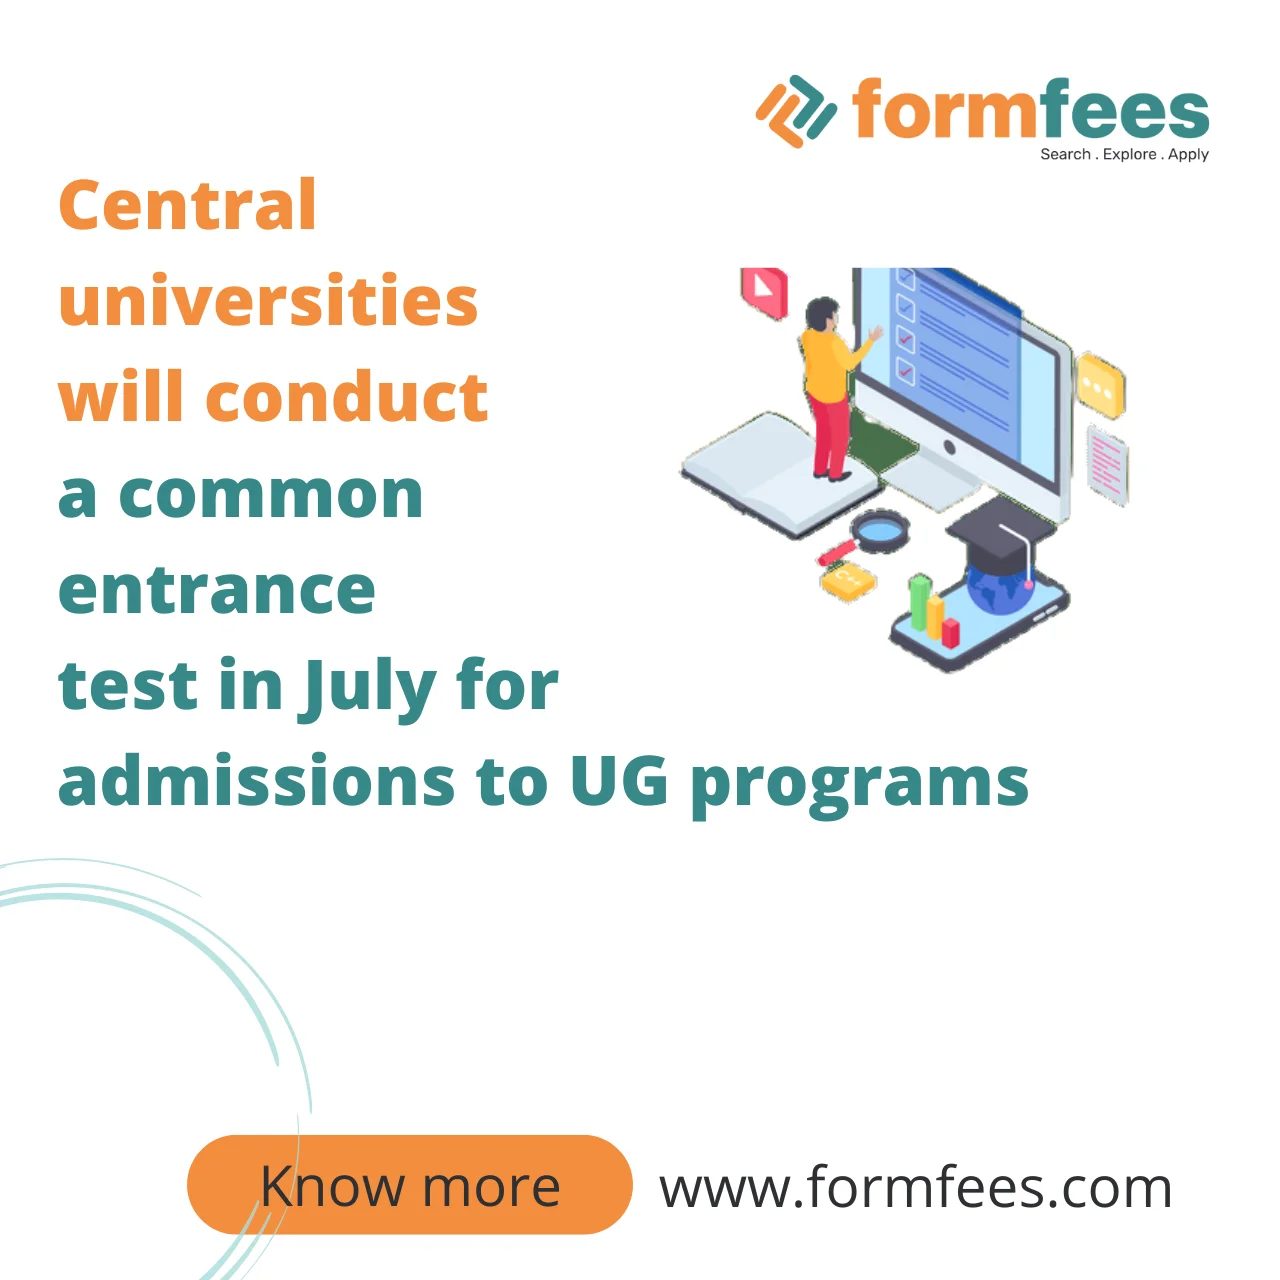 Central universities will conduct a common entrance test in July for admissions to UG programs